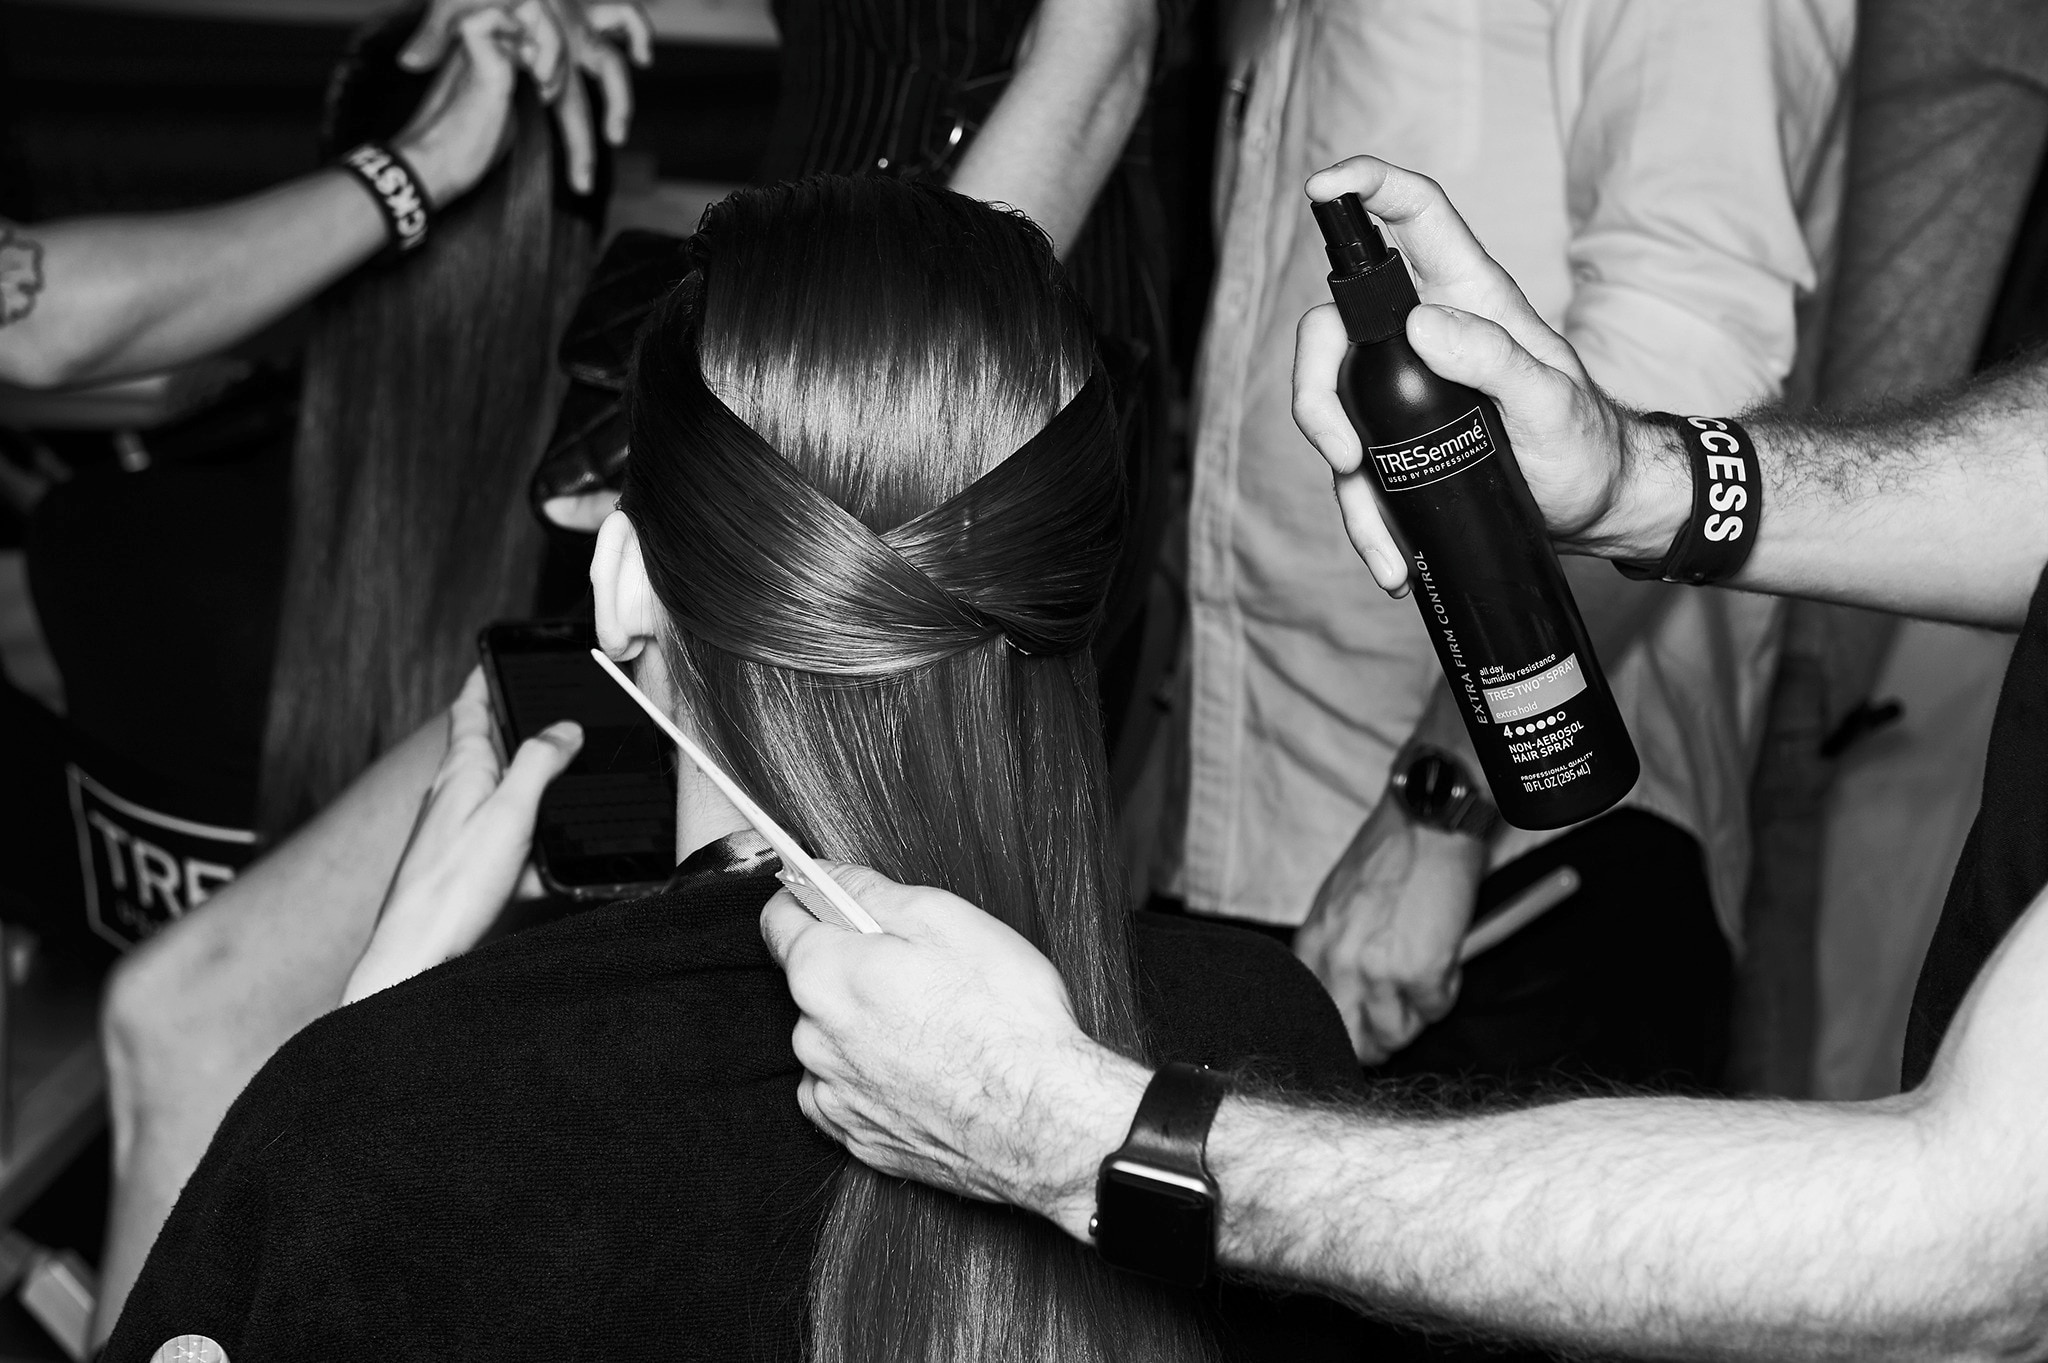 A stylist applying spray to a model's hair with other models and stylists in the background